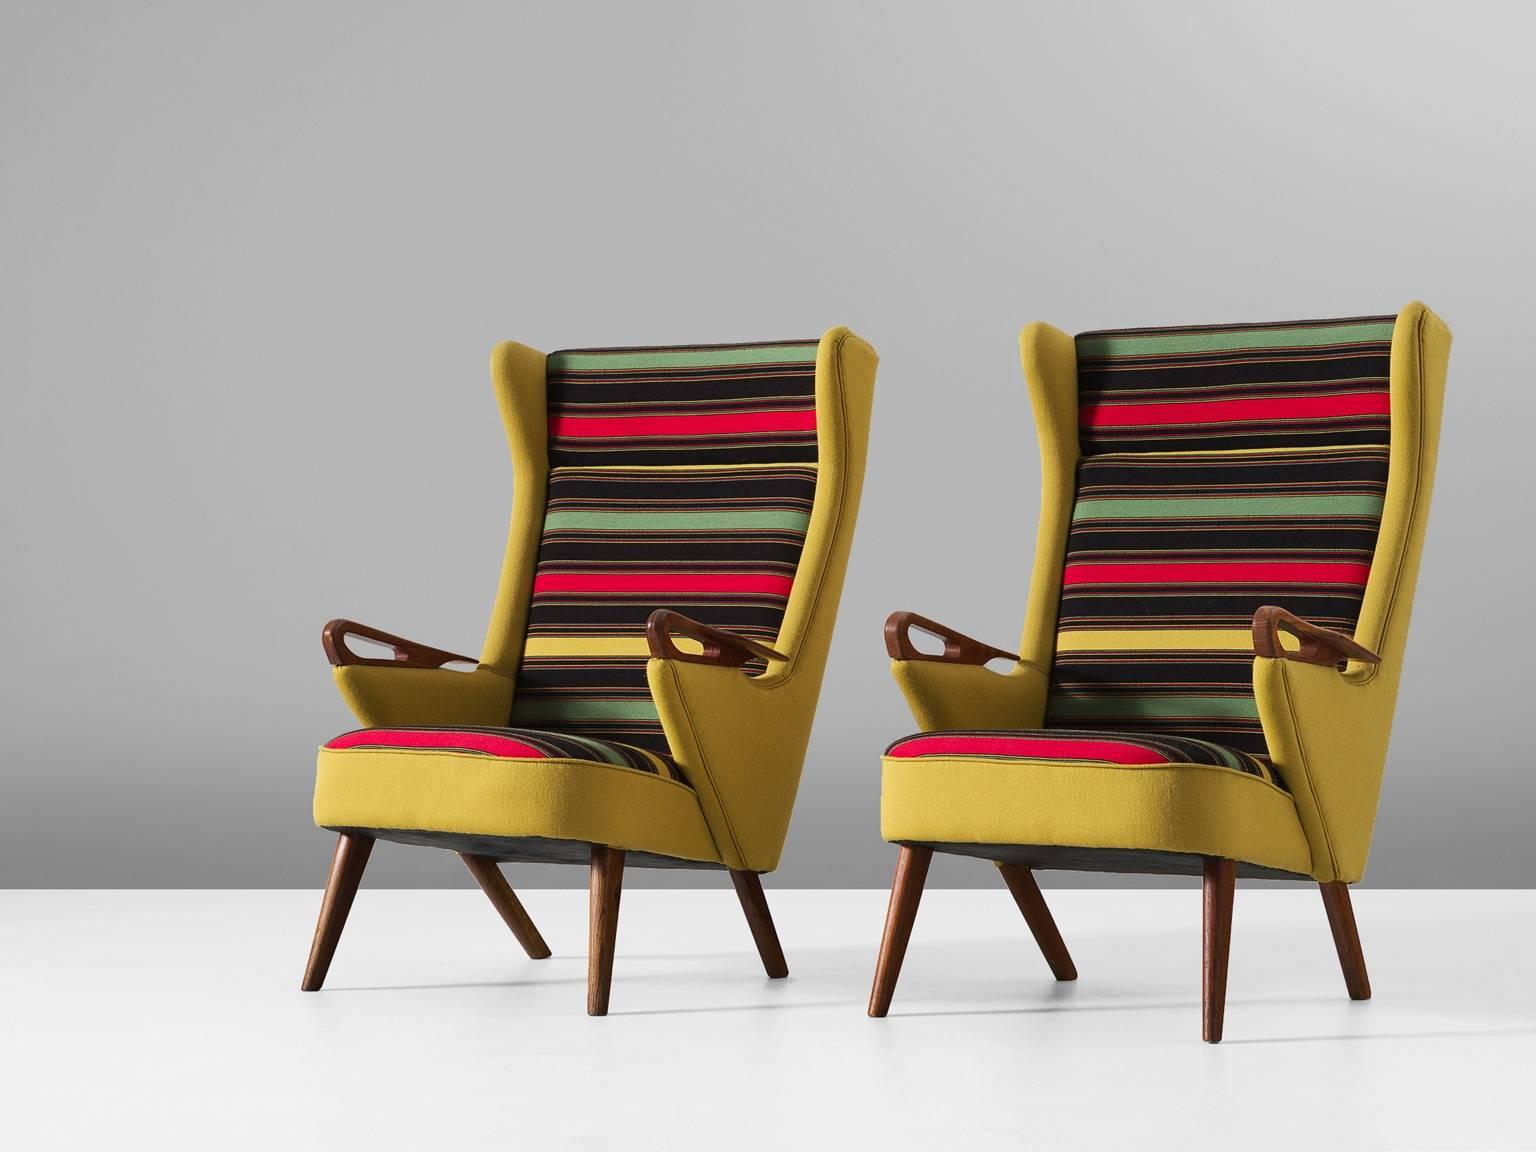 Pair of lounge chairs, in teak and fabric, Denmark, 1960s.

Colorful pair of reupholstered Danish armchairs. These elegant chairs are upholstered in yellow fabric on the outside and striped multicolor on the inside. The high back shows a nice